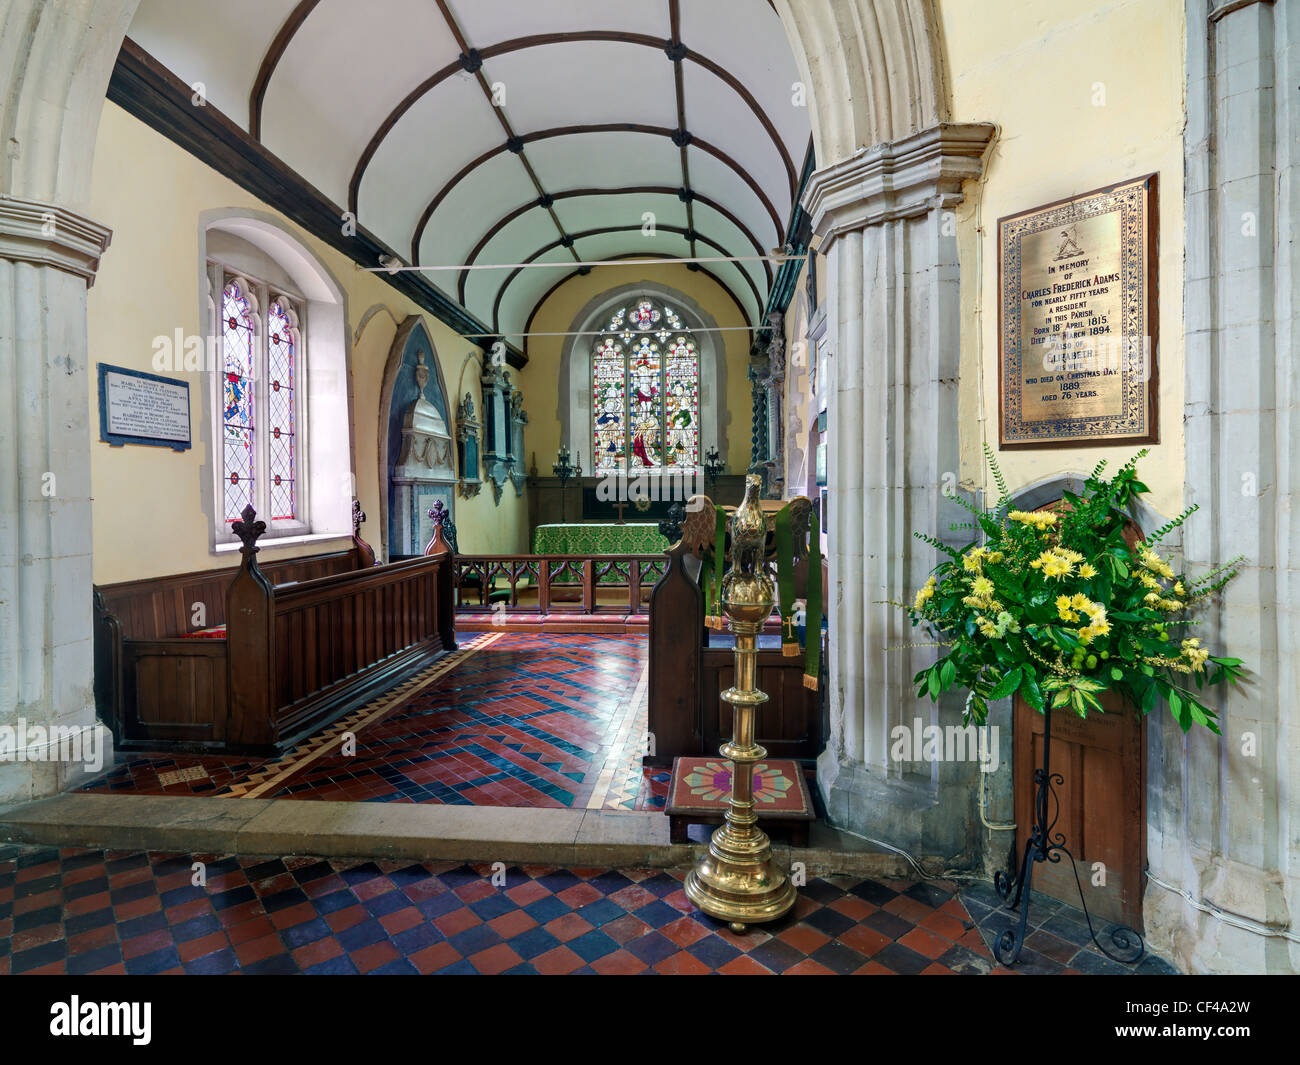 The interior of St. Mary Magdalene Church in Barkway. Stock Photo